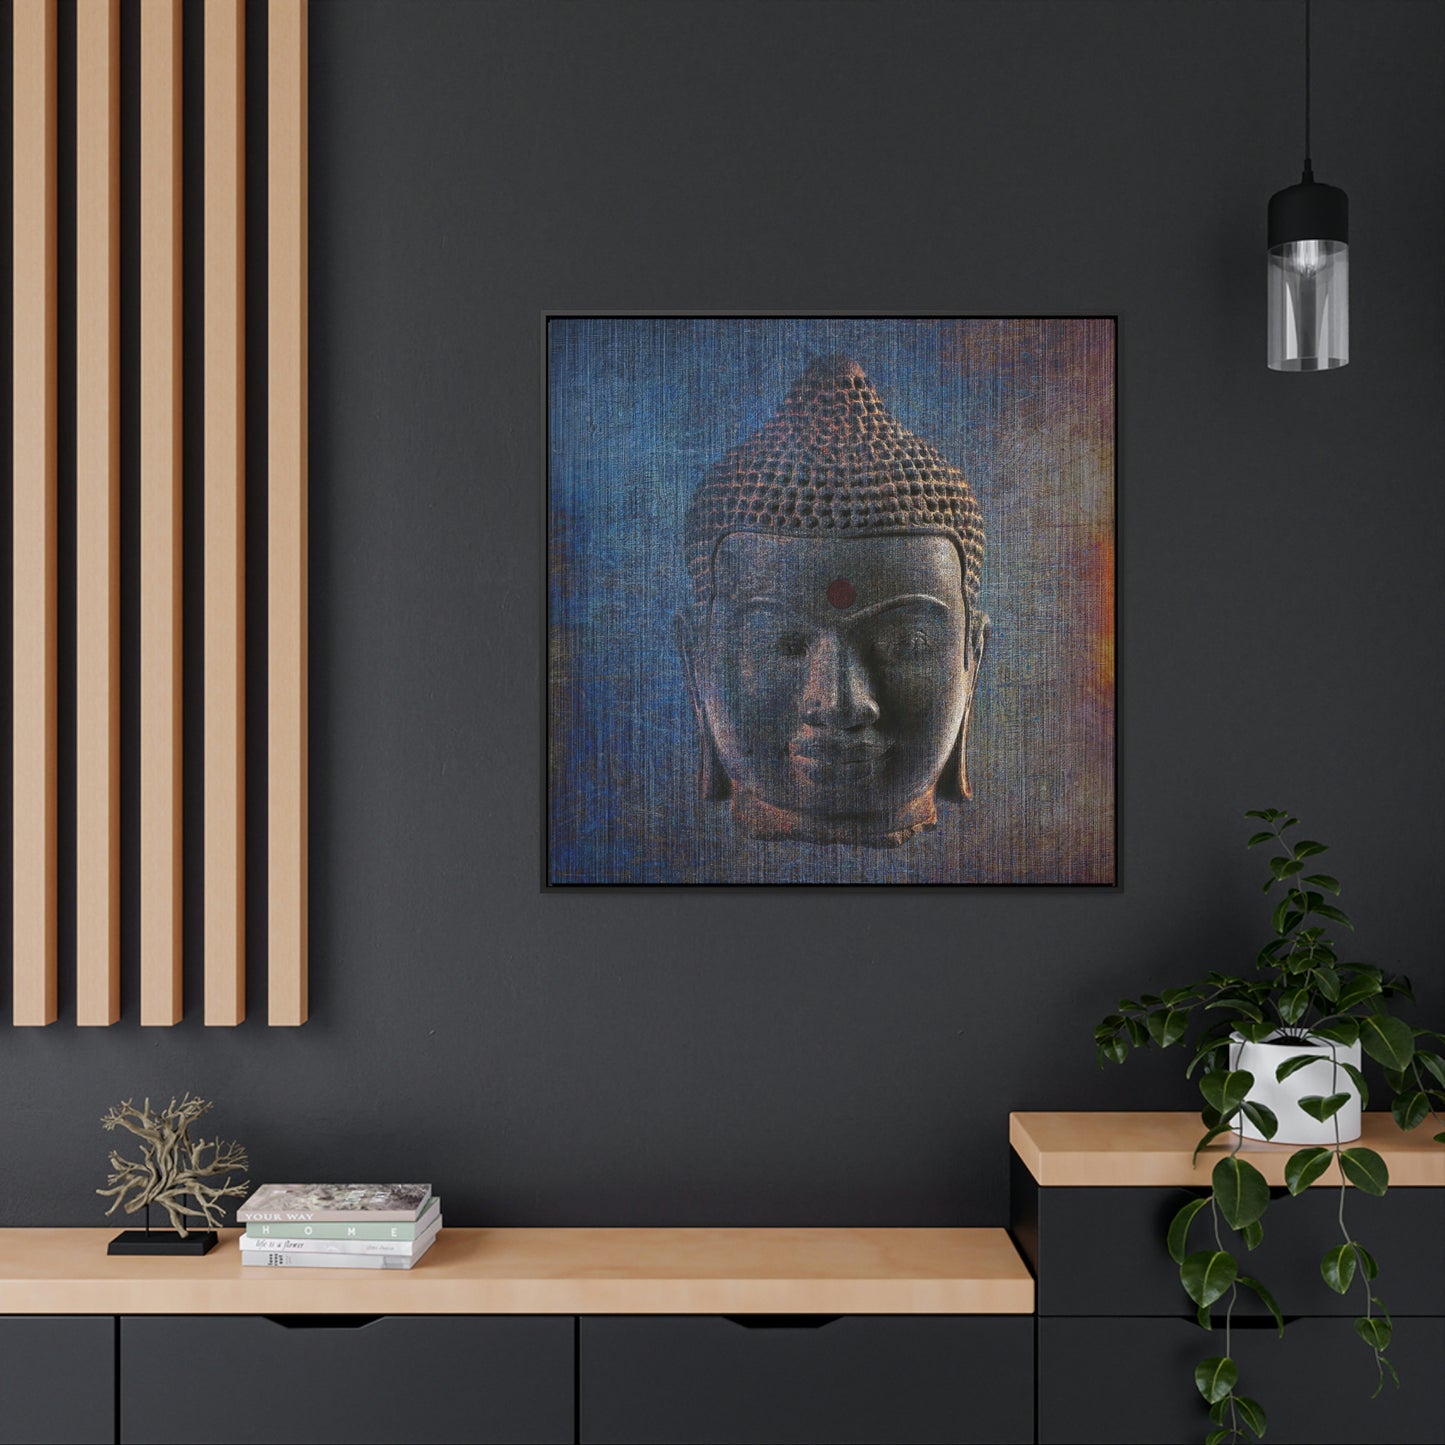 Distressed Blue Buddha Head Print on Square Canvas in a Floating Frame hung on dark wall